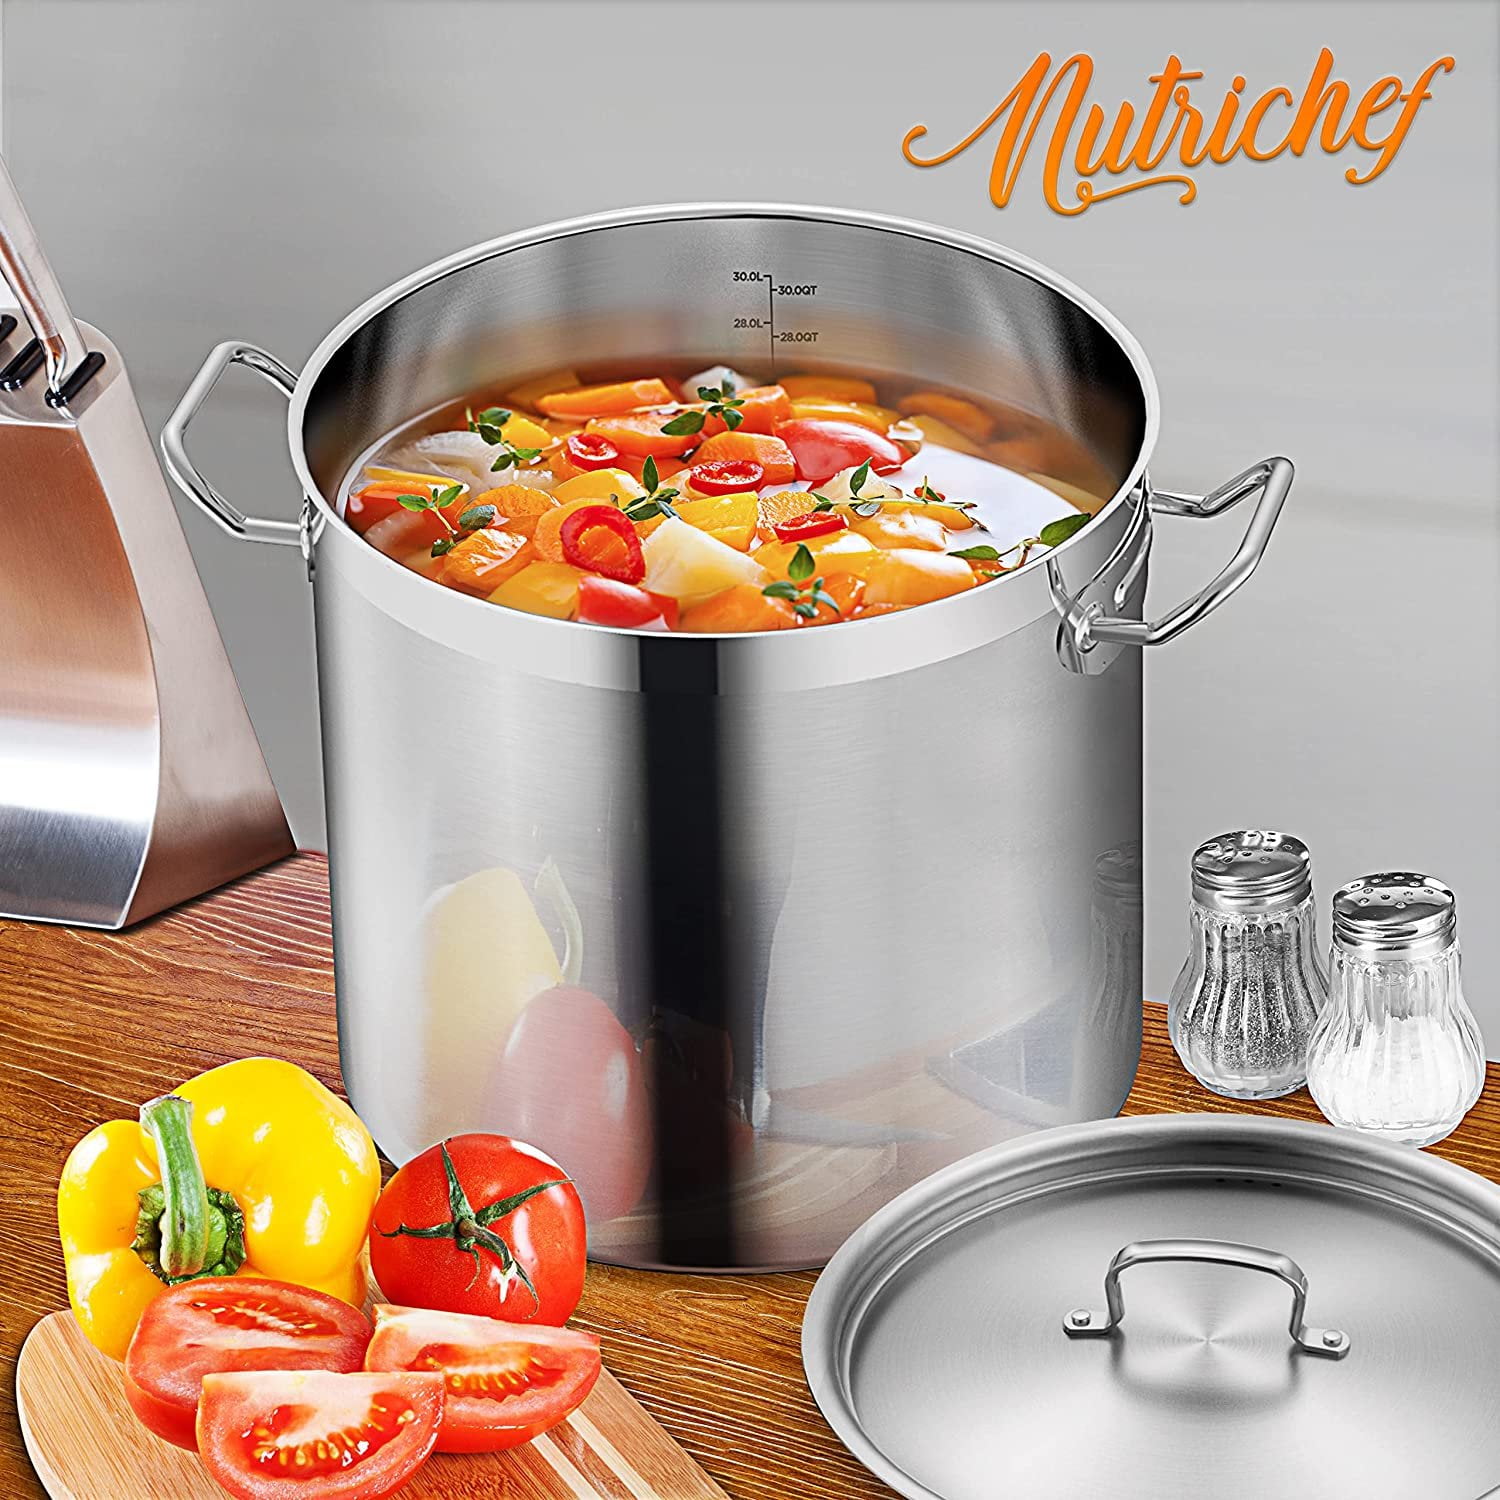 NutriChef 6 qt. Stainless Steel Heavy Duty Induction Pot, Soup Pot, Stockpot  with Lid NCSP6 - The Home Depot